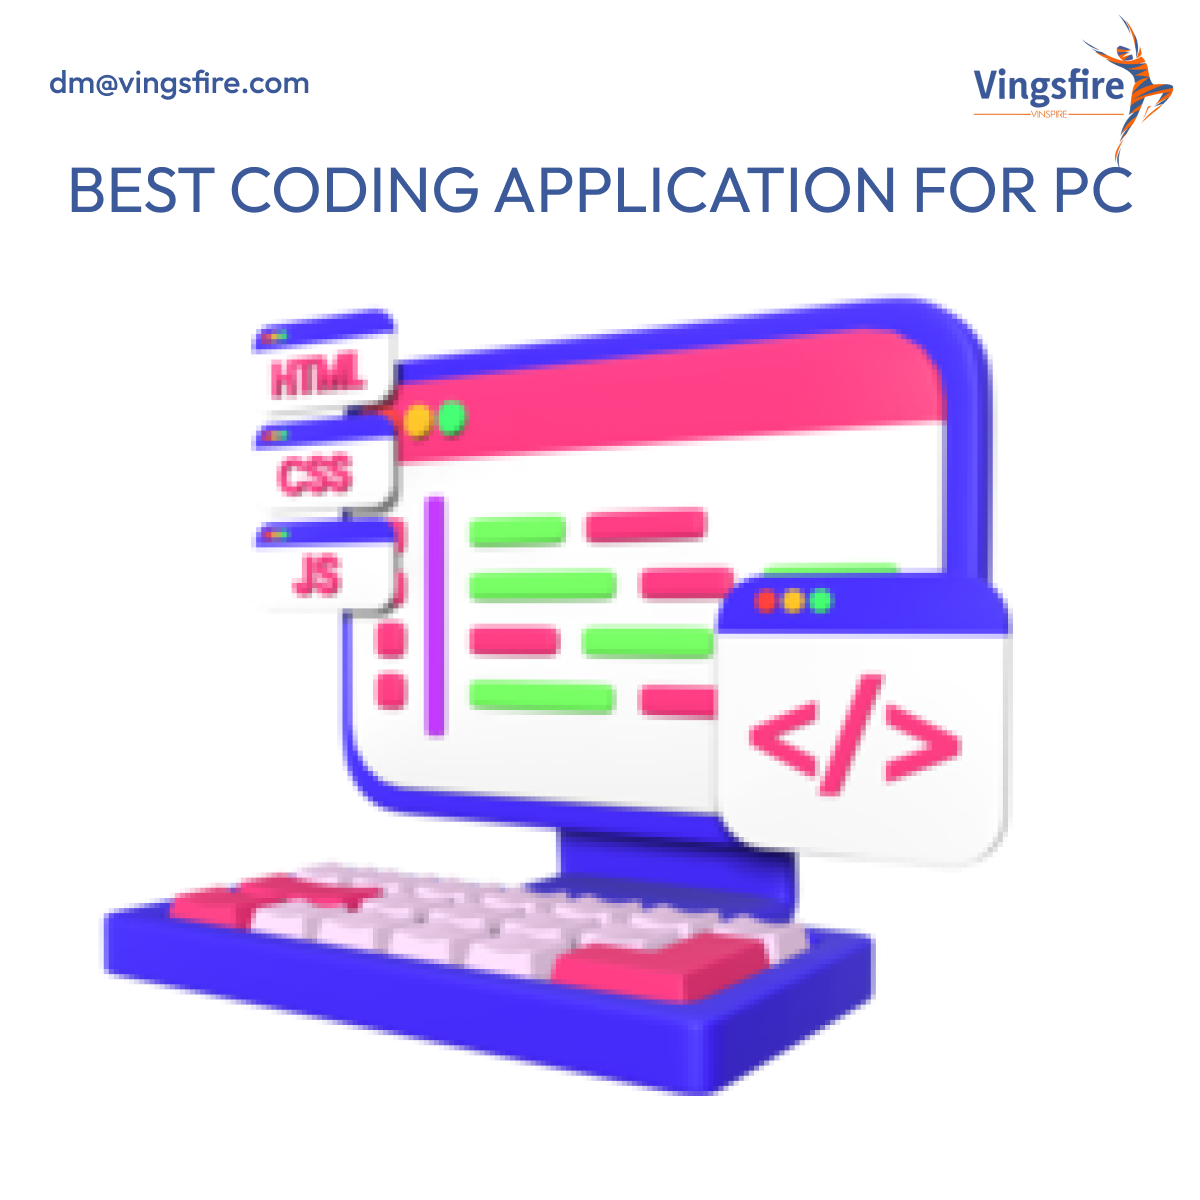 Code application for pc